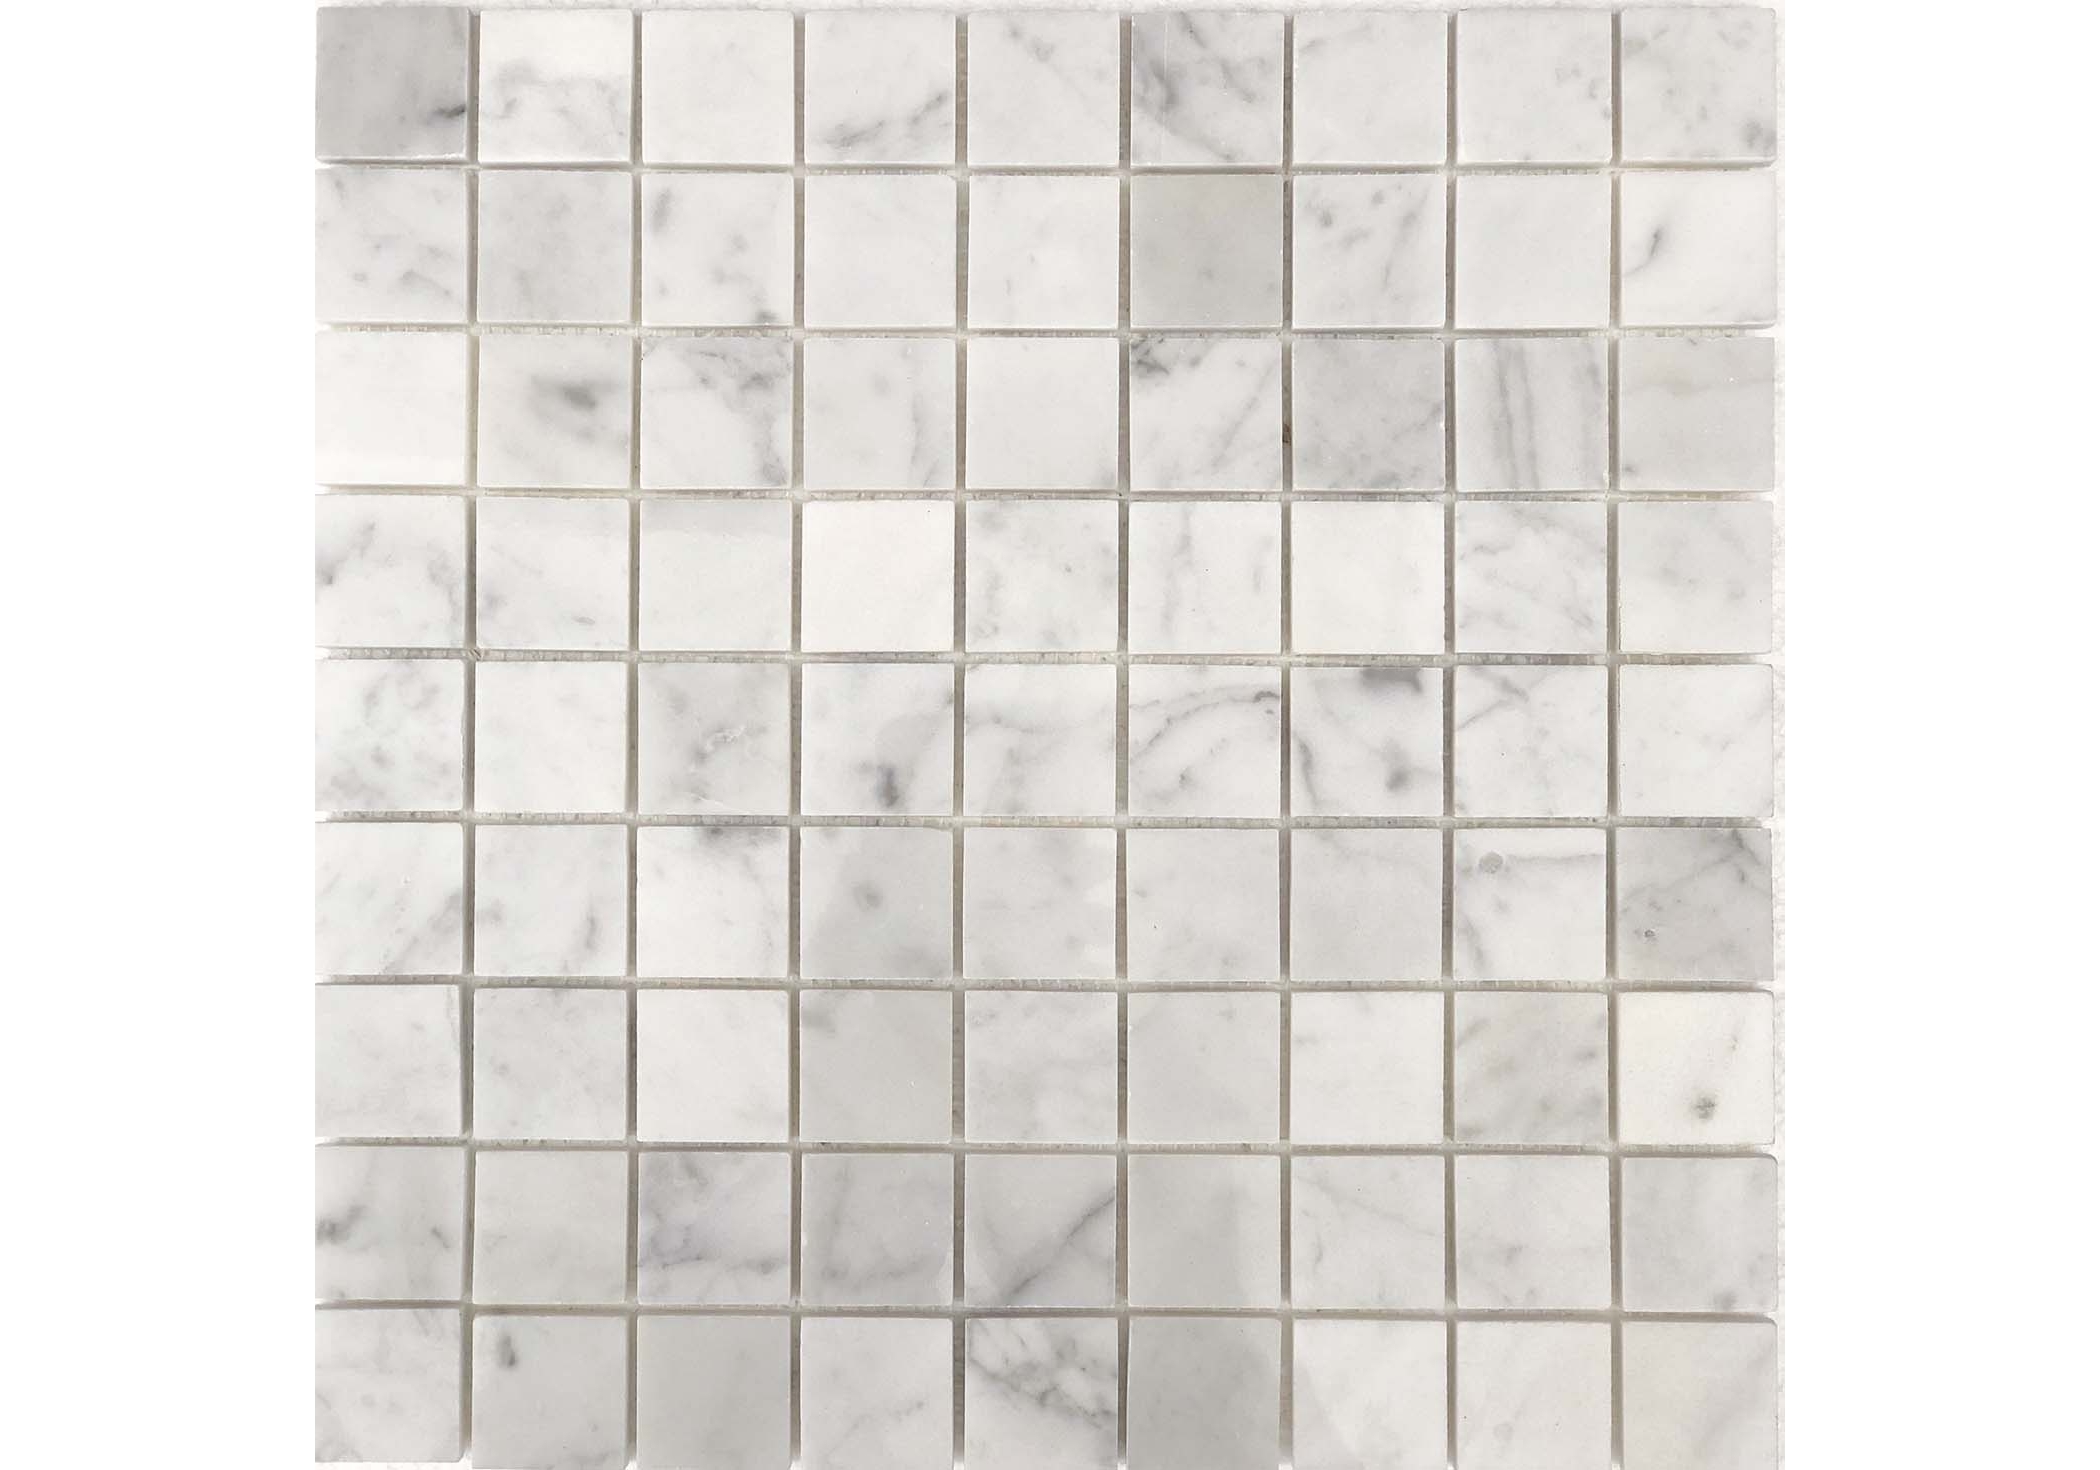 Мозаика Orro mosaic Stone Bianco Carrara Pol. 30x30x7 30,5x30,5 5 inches traditional chinese natural stone carved calligraphy kid supplies ink stone inkstone ink accessory for practice writing